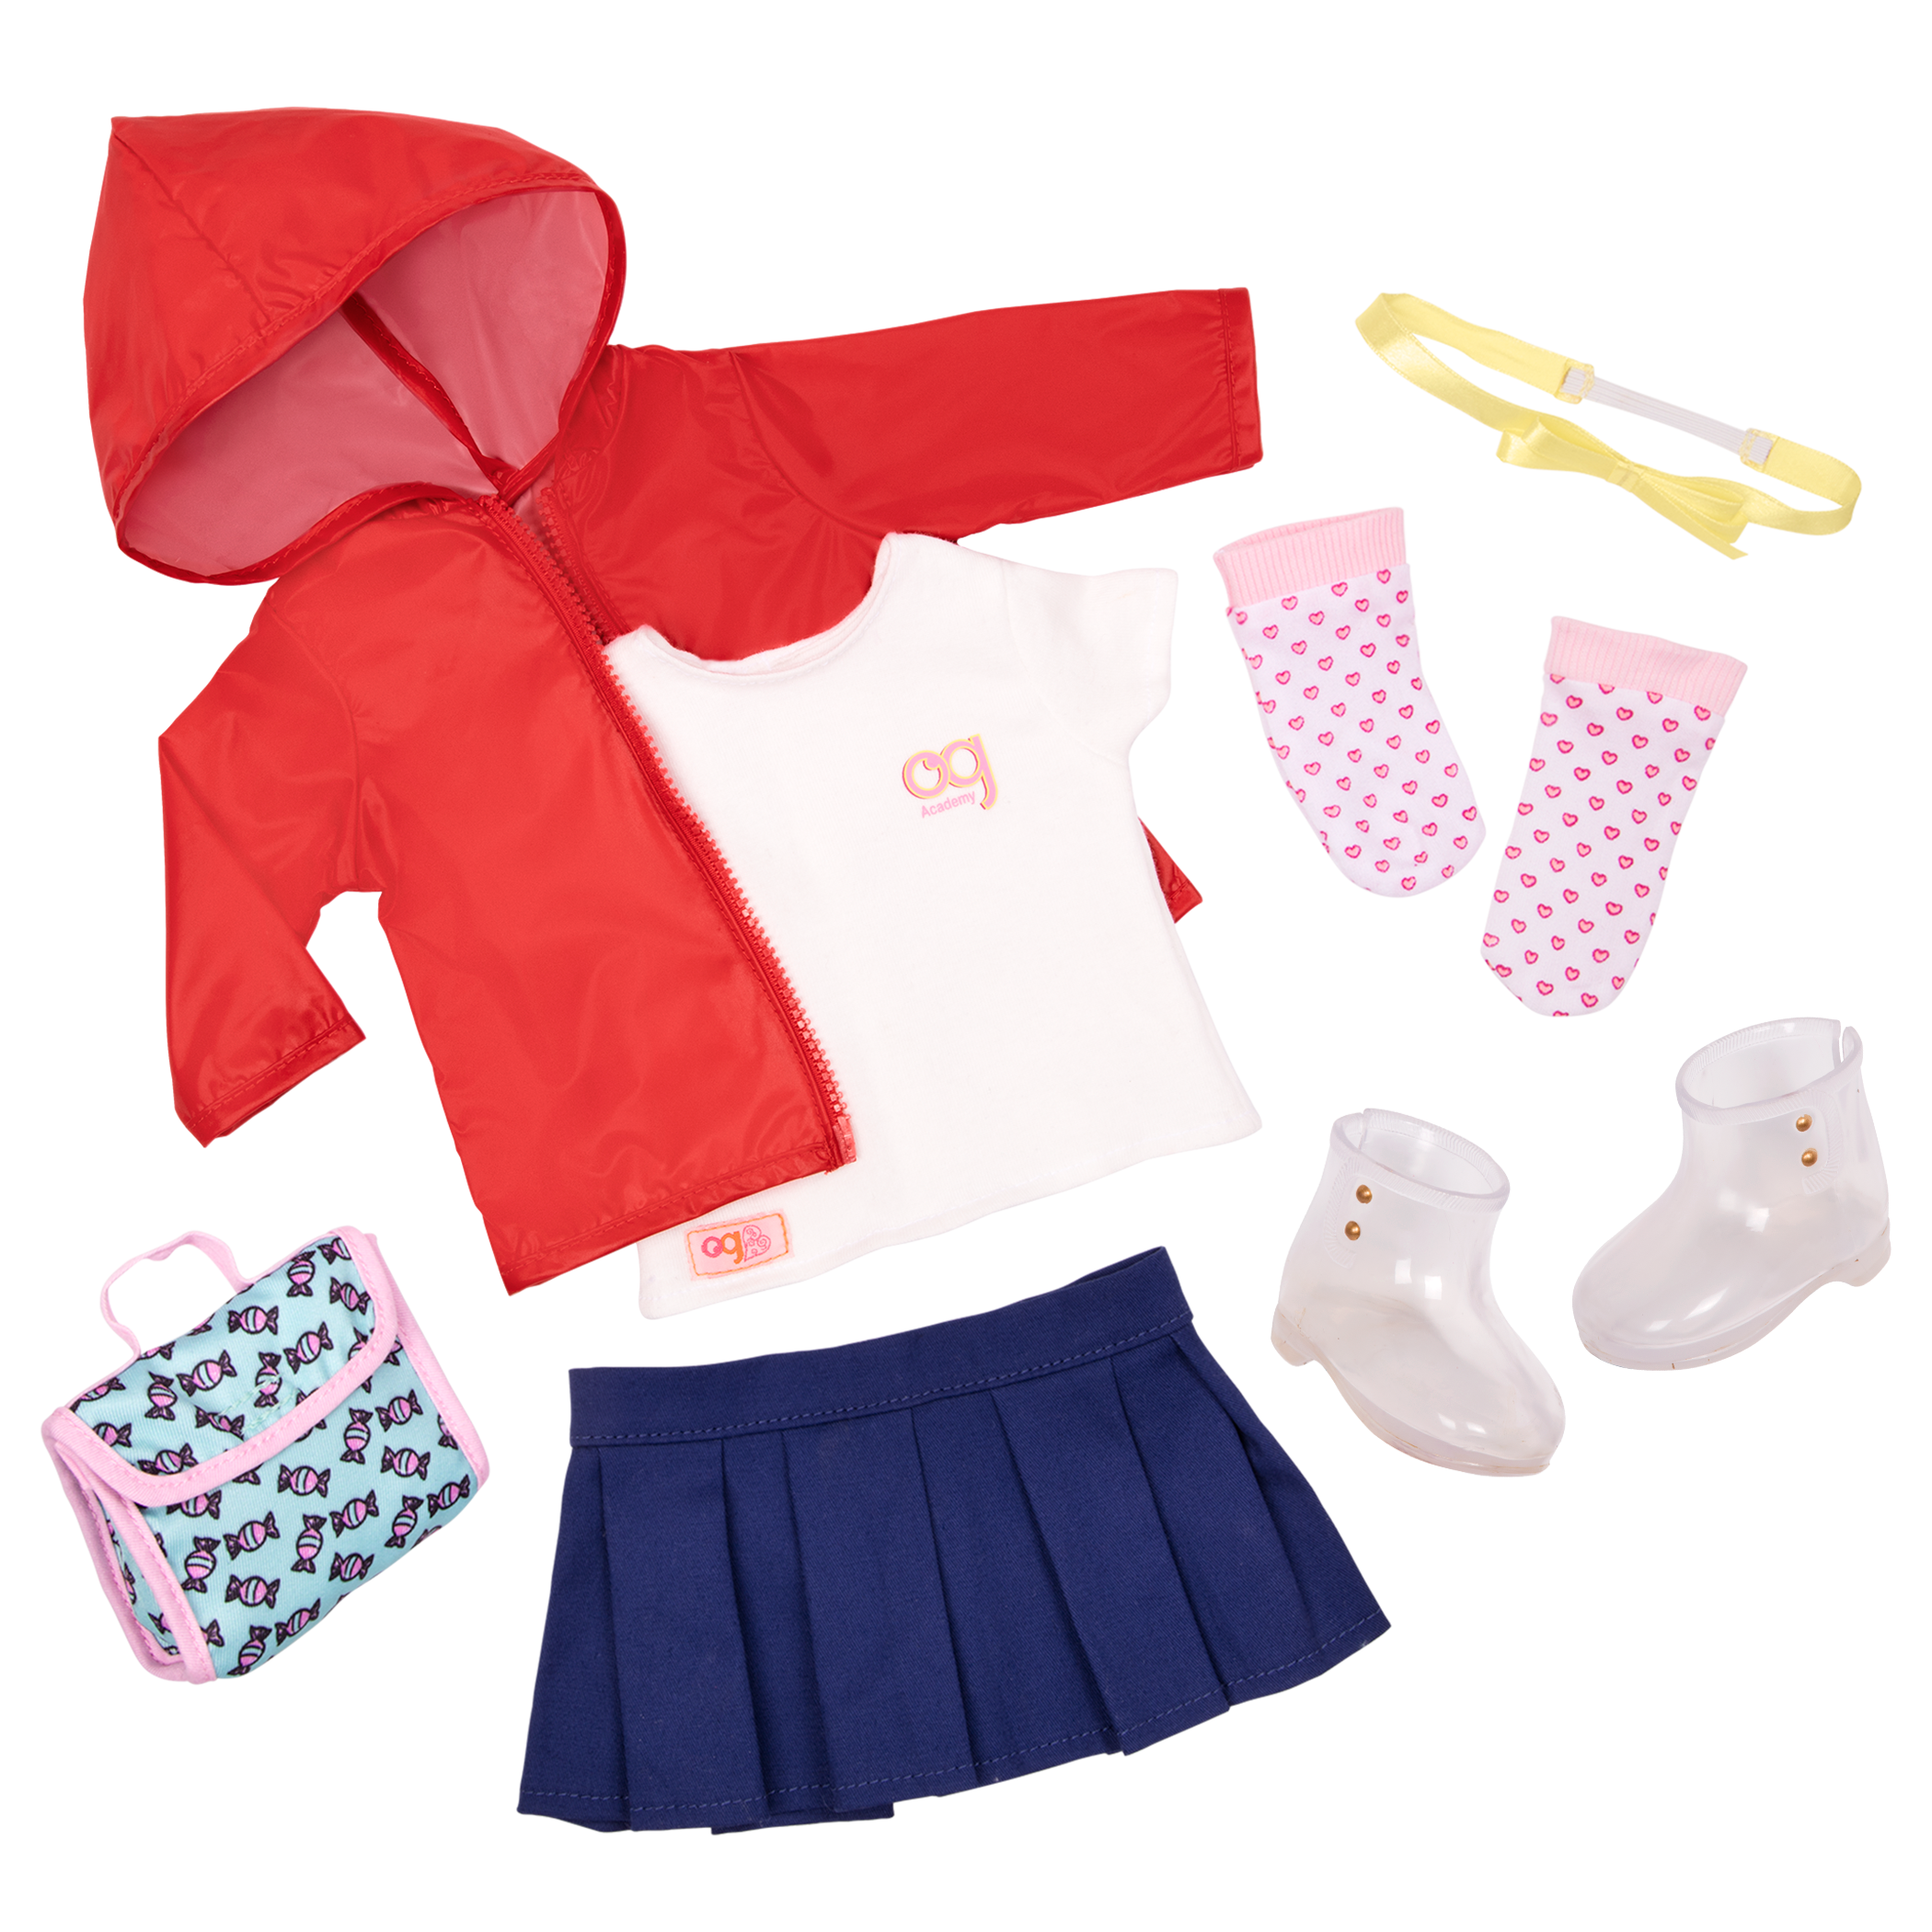 Rainy Recess School Outfit